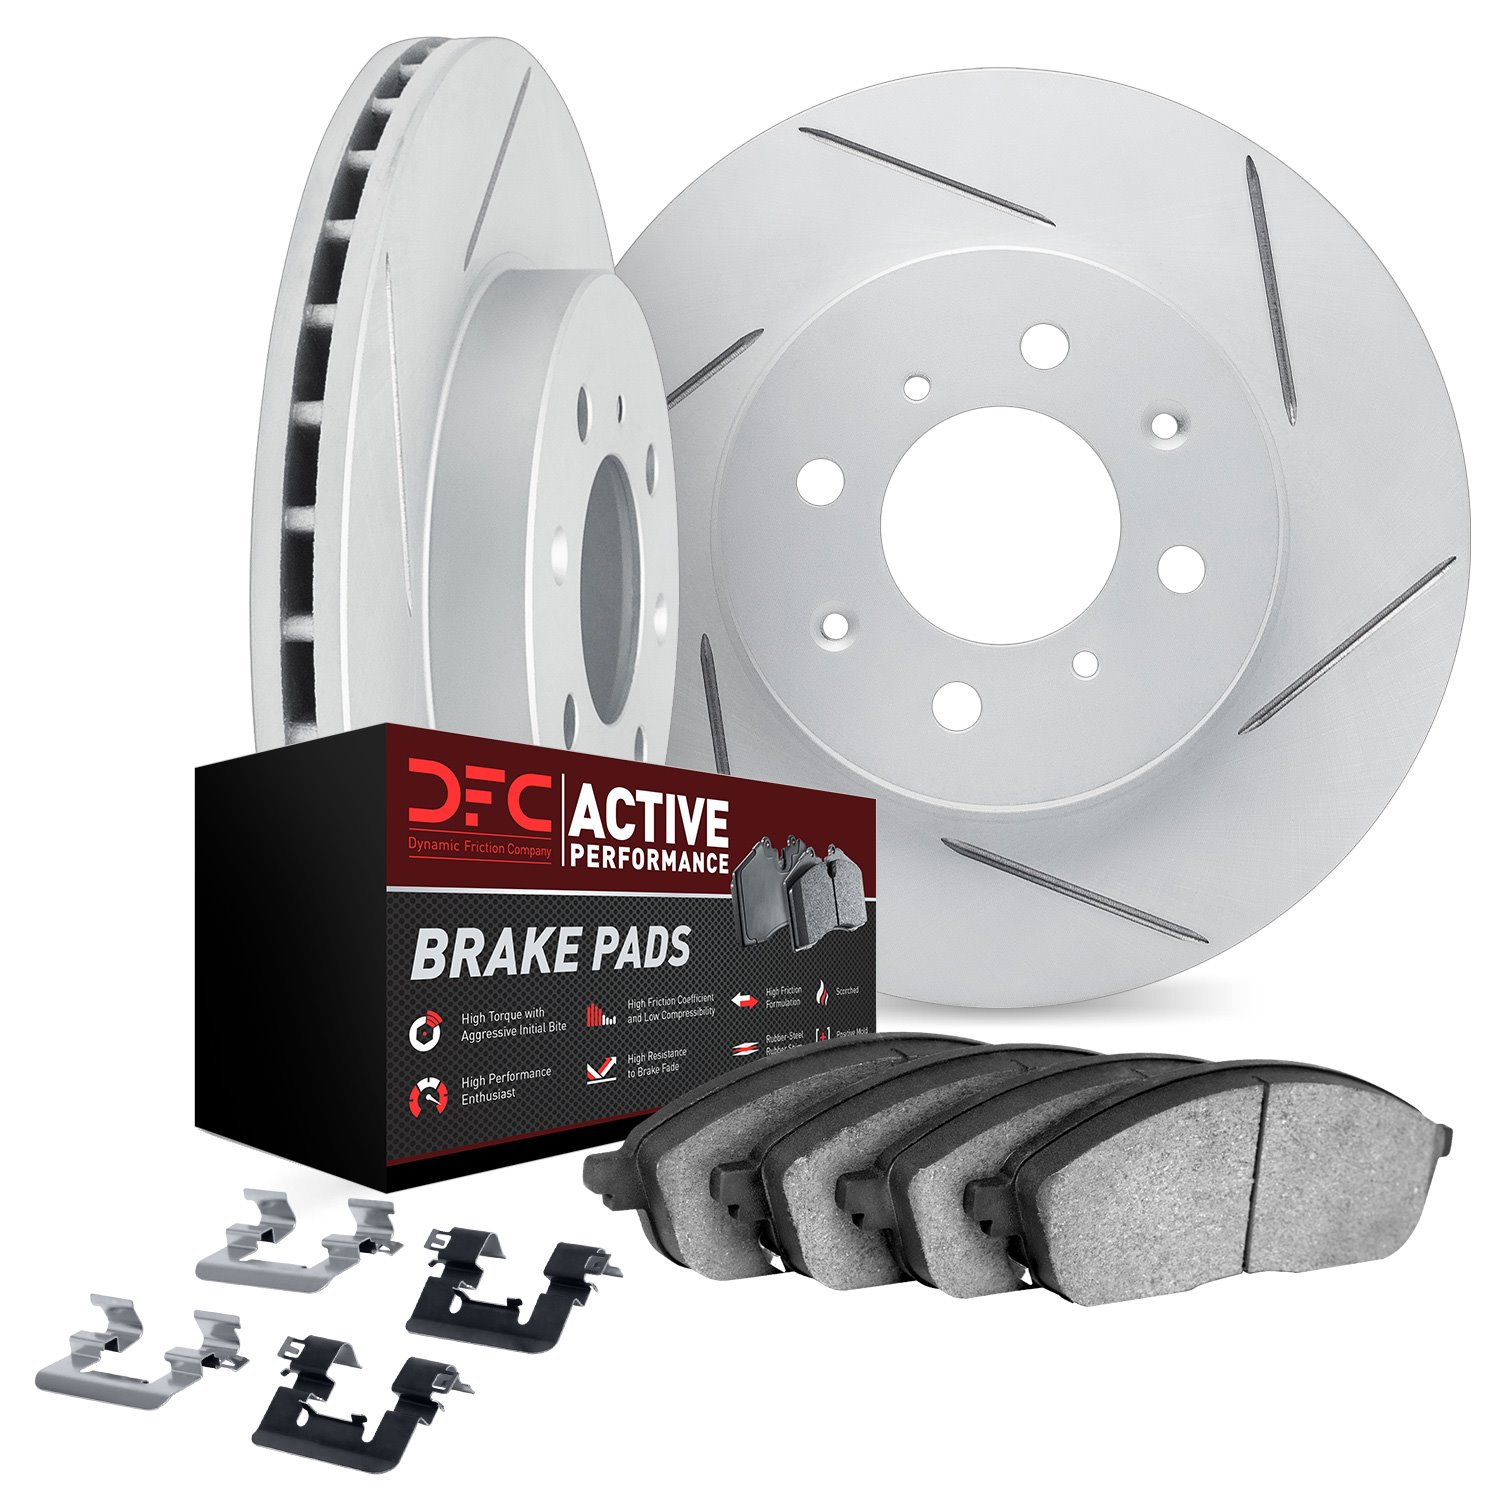 2712-67018 Geoperformance Slotted Brake Rotors with Active Performance Pads Kits & Hardware, 1993-2006 Infiniti/Nissan, Position